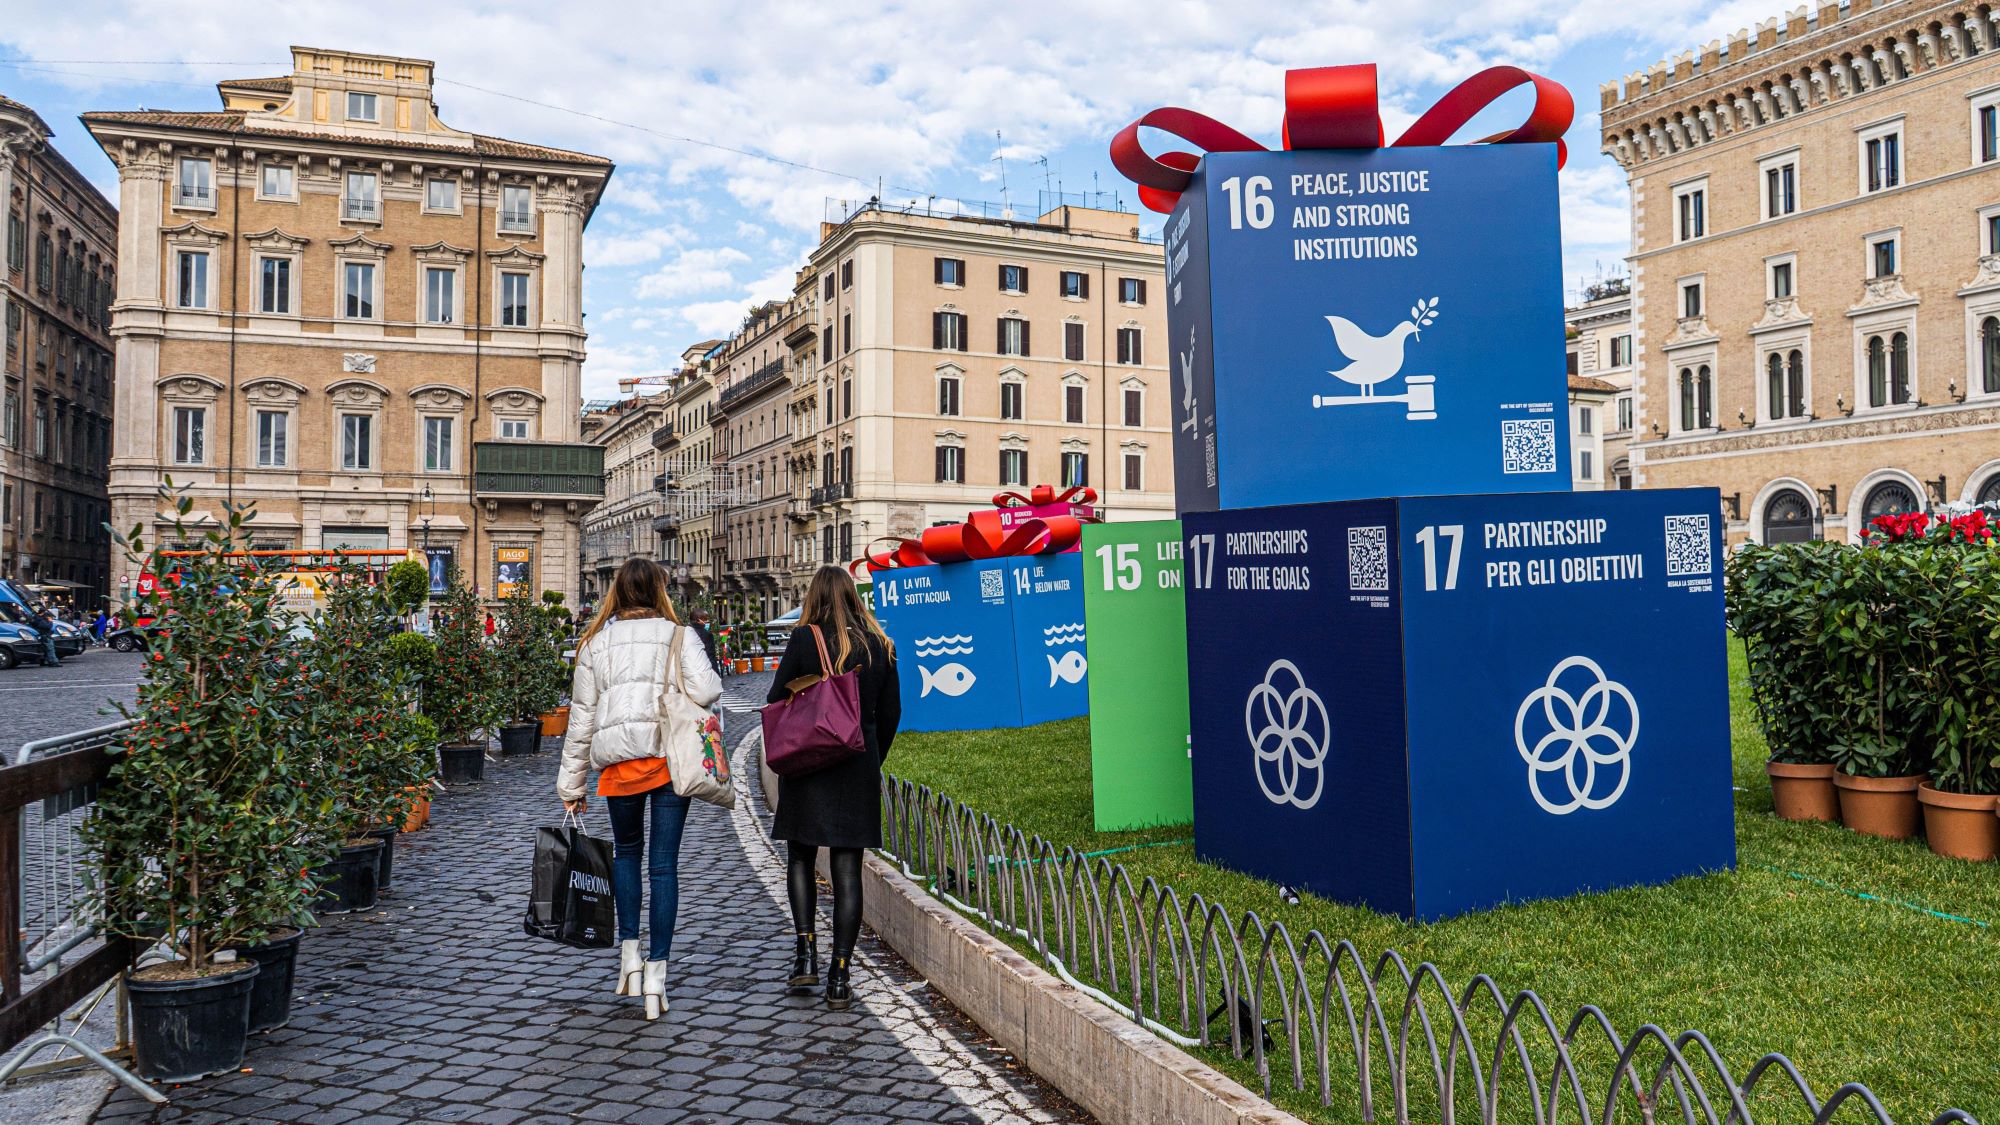  Two people are walking across a town square that is decorated with big boxes representing the UN's Sustainable Development Goals. Readable are boxes with goal 16 Peace, Justice and strong institutions and goal 17 Partnerships for the goals.